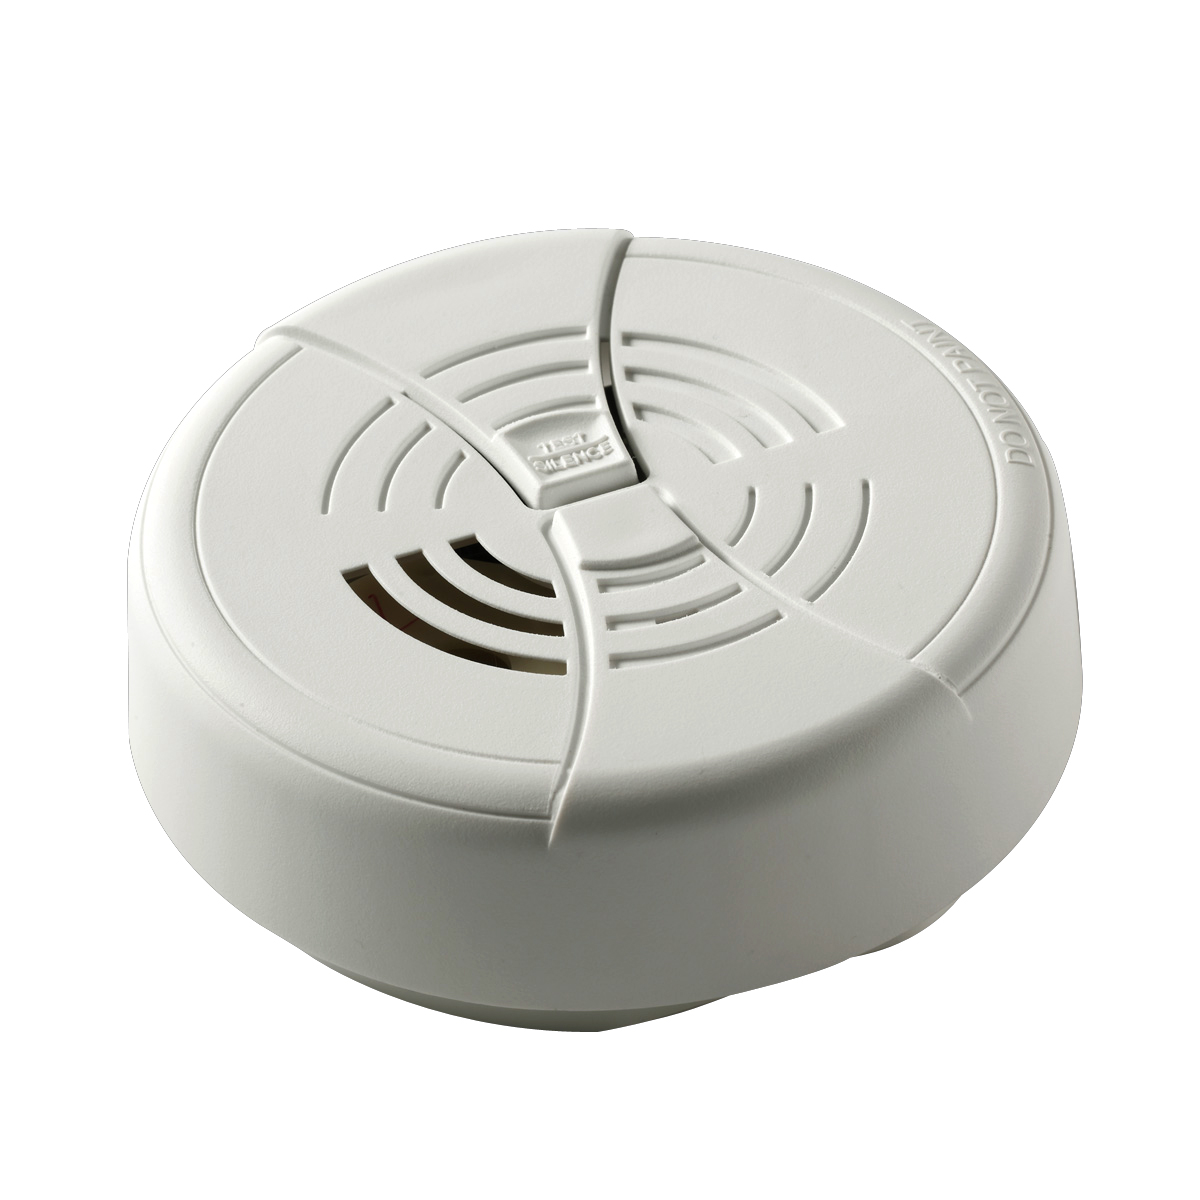 Basic battery operated smoke alarm perfect for use in existing multi-family applications.